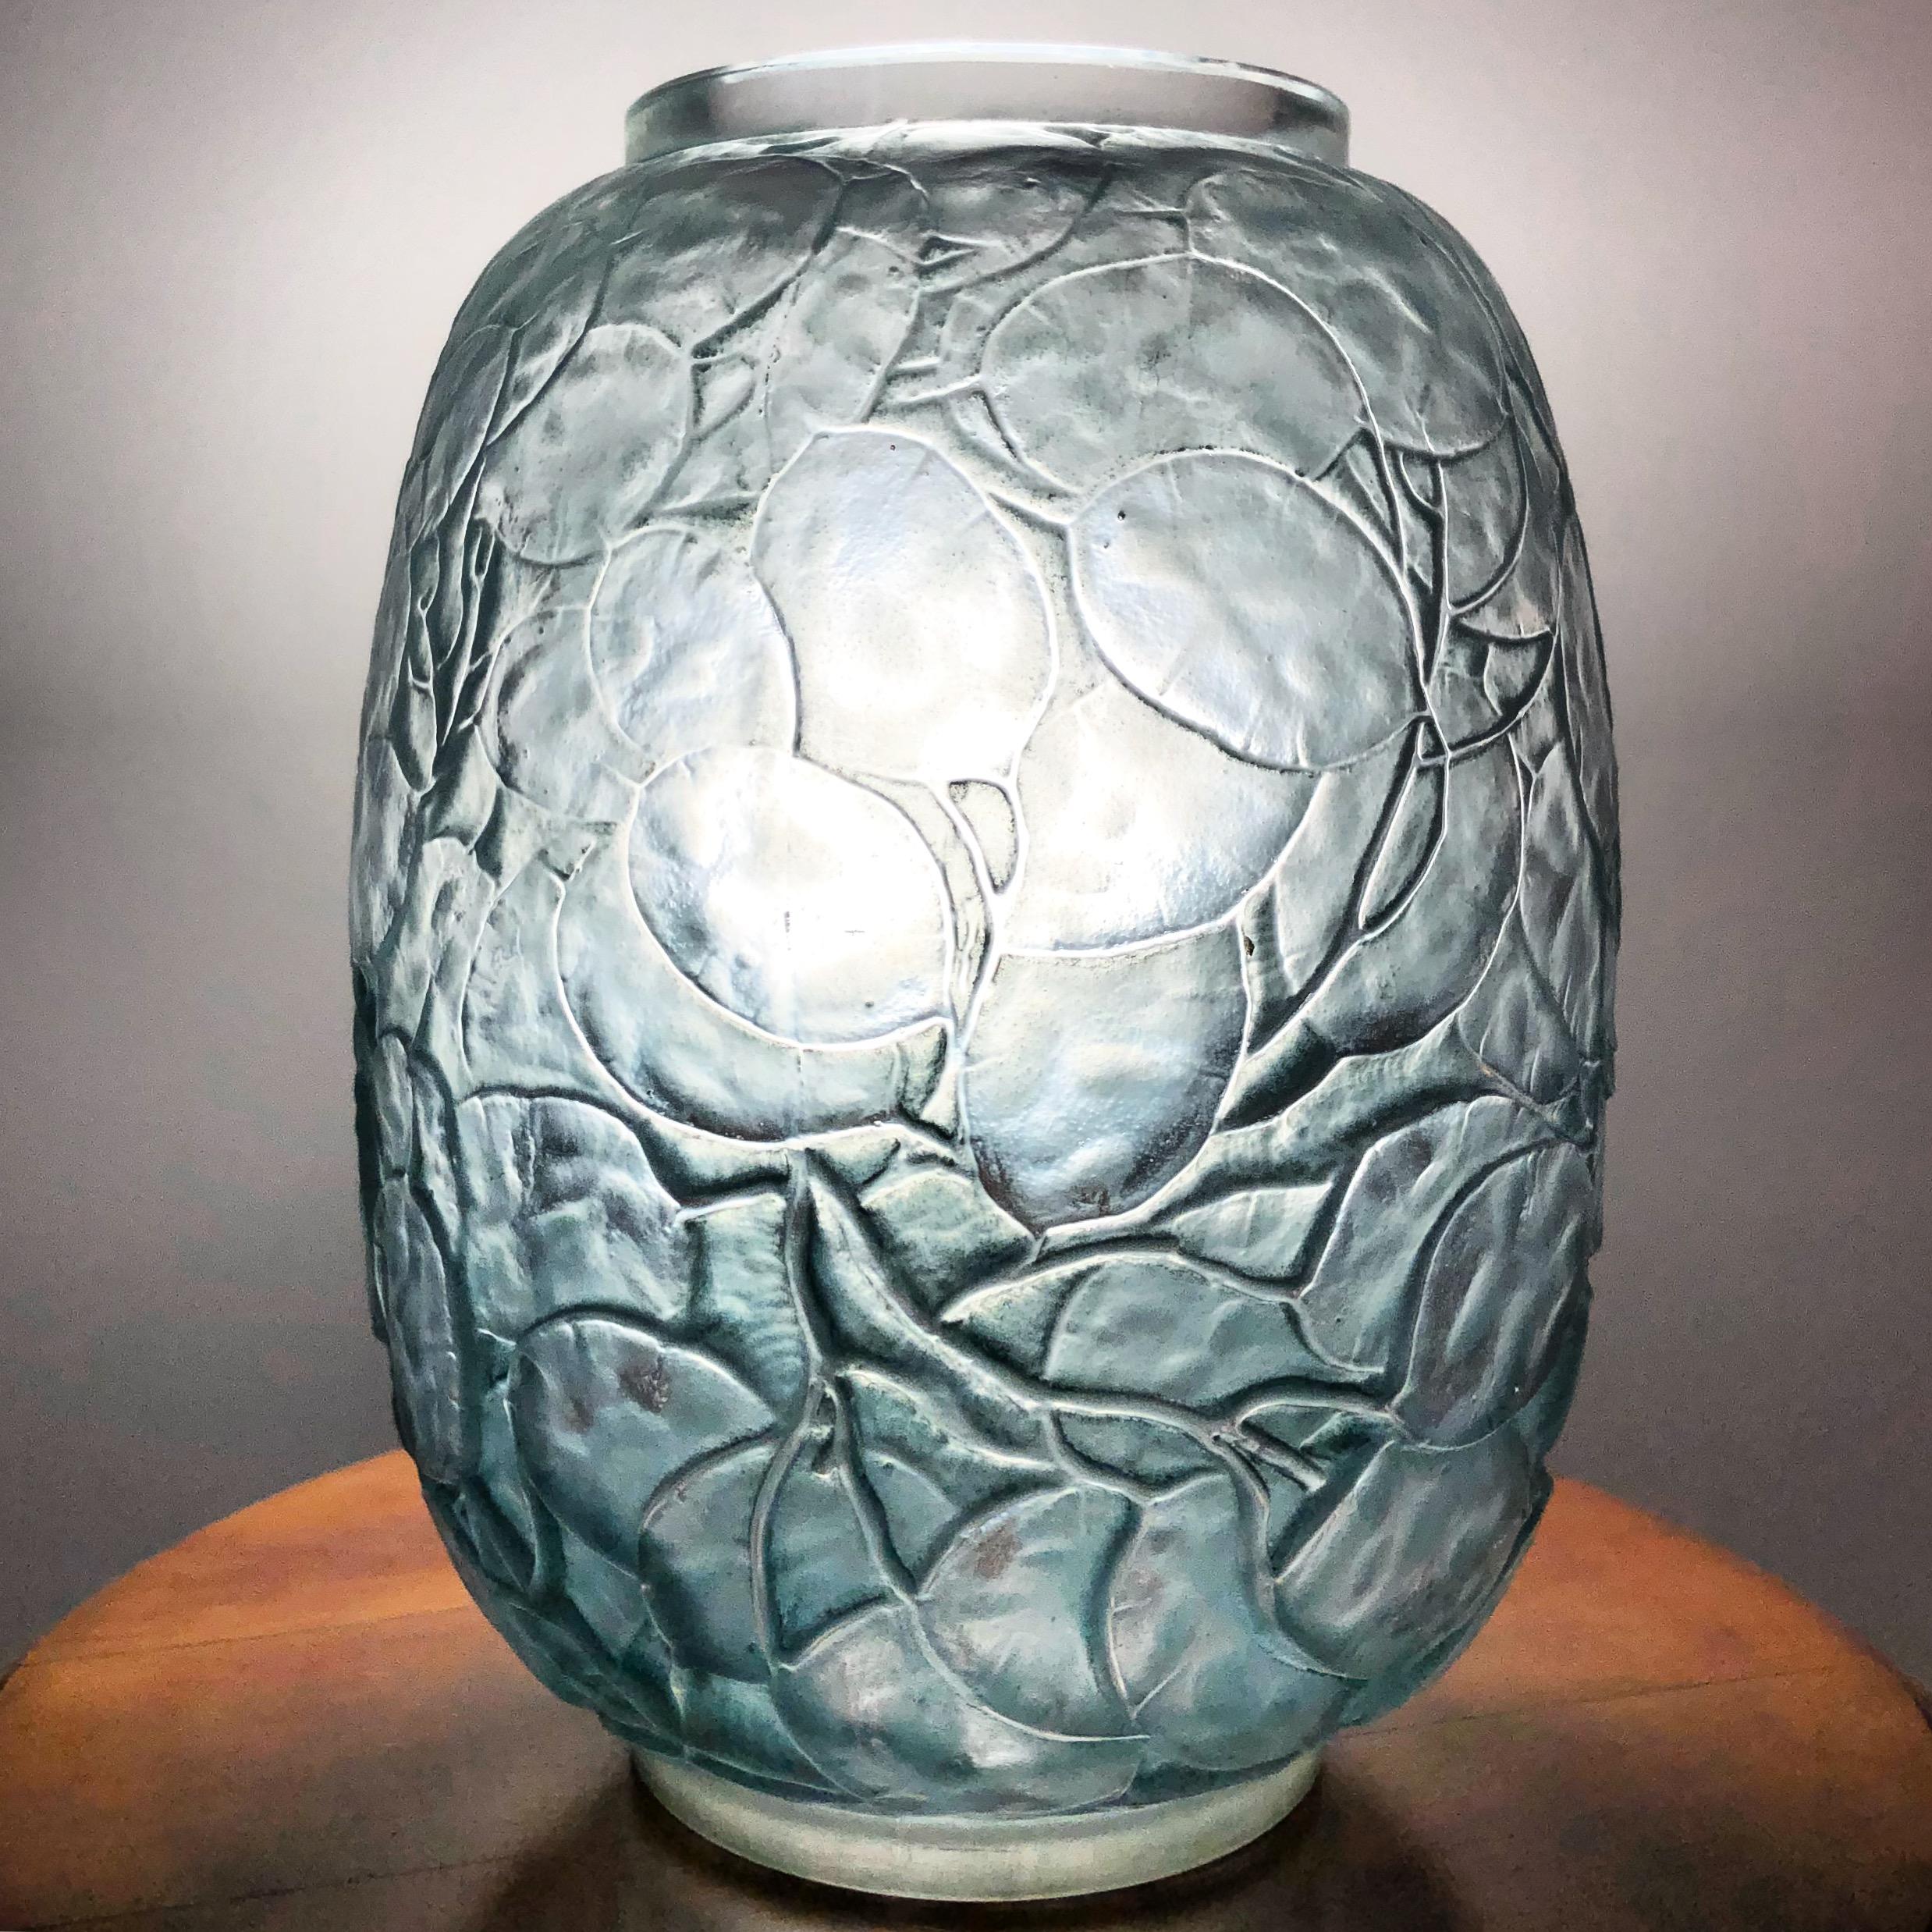 French 1914 René Lalique Monnaie du Pape Vase in Frosted Glass with Grey-Blue Stain